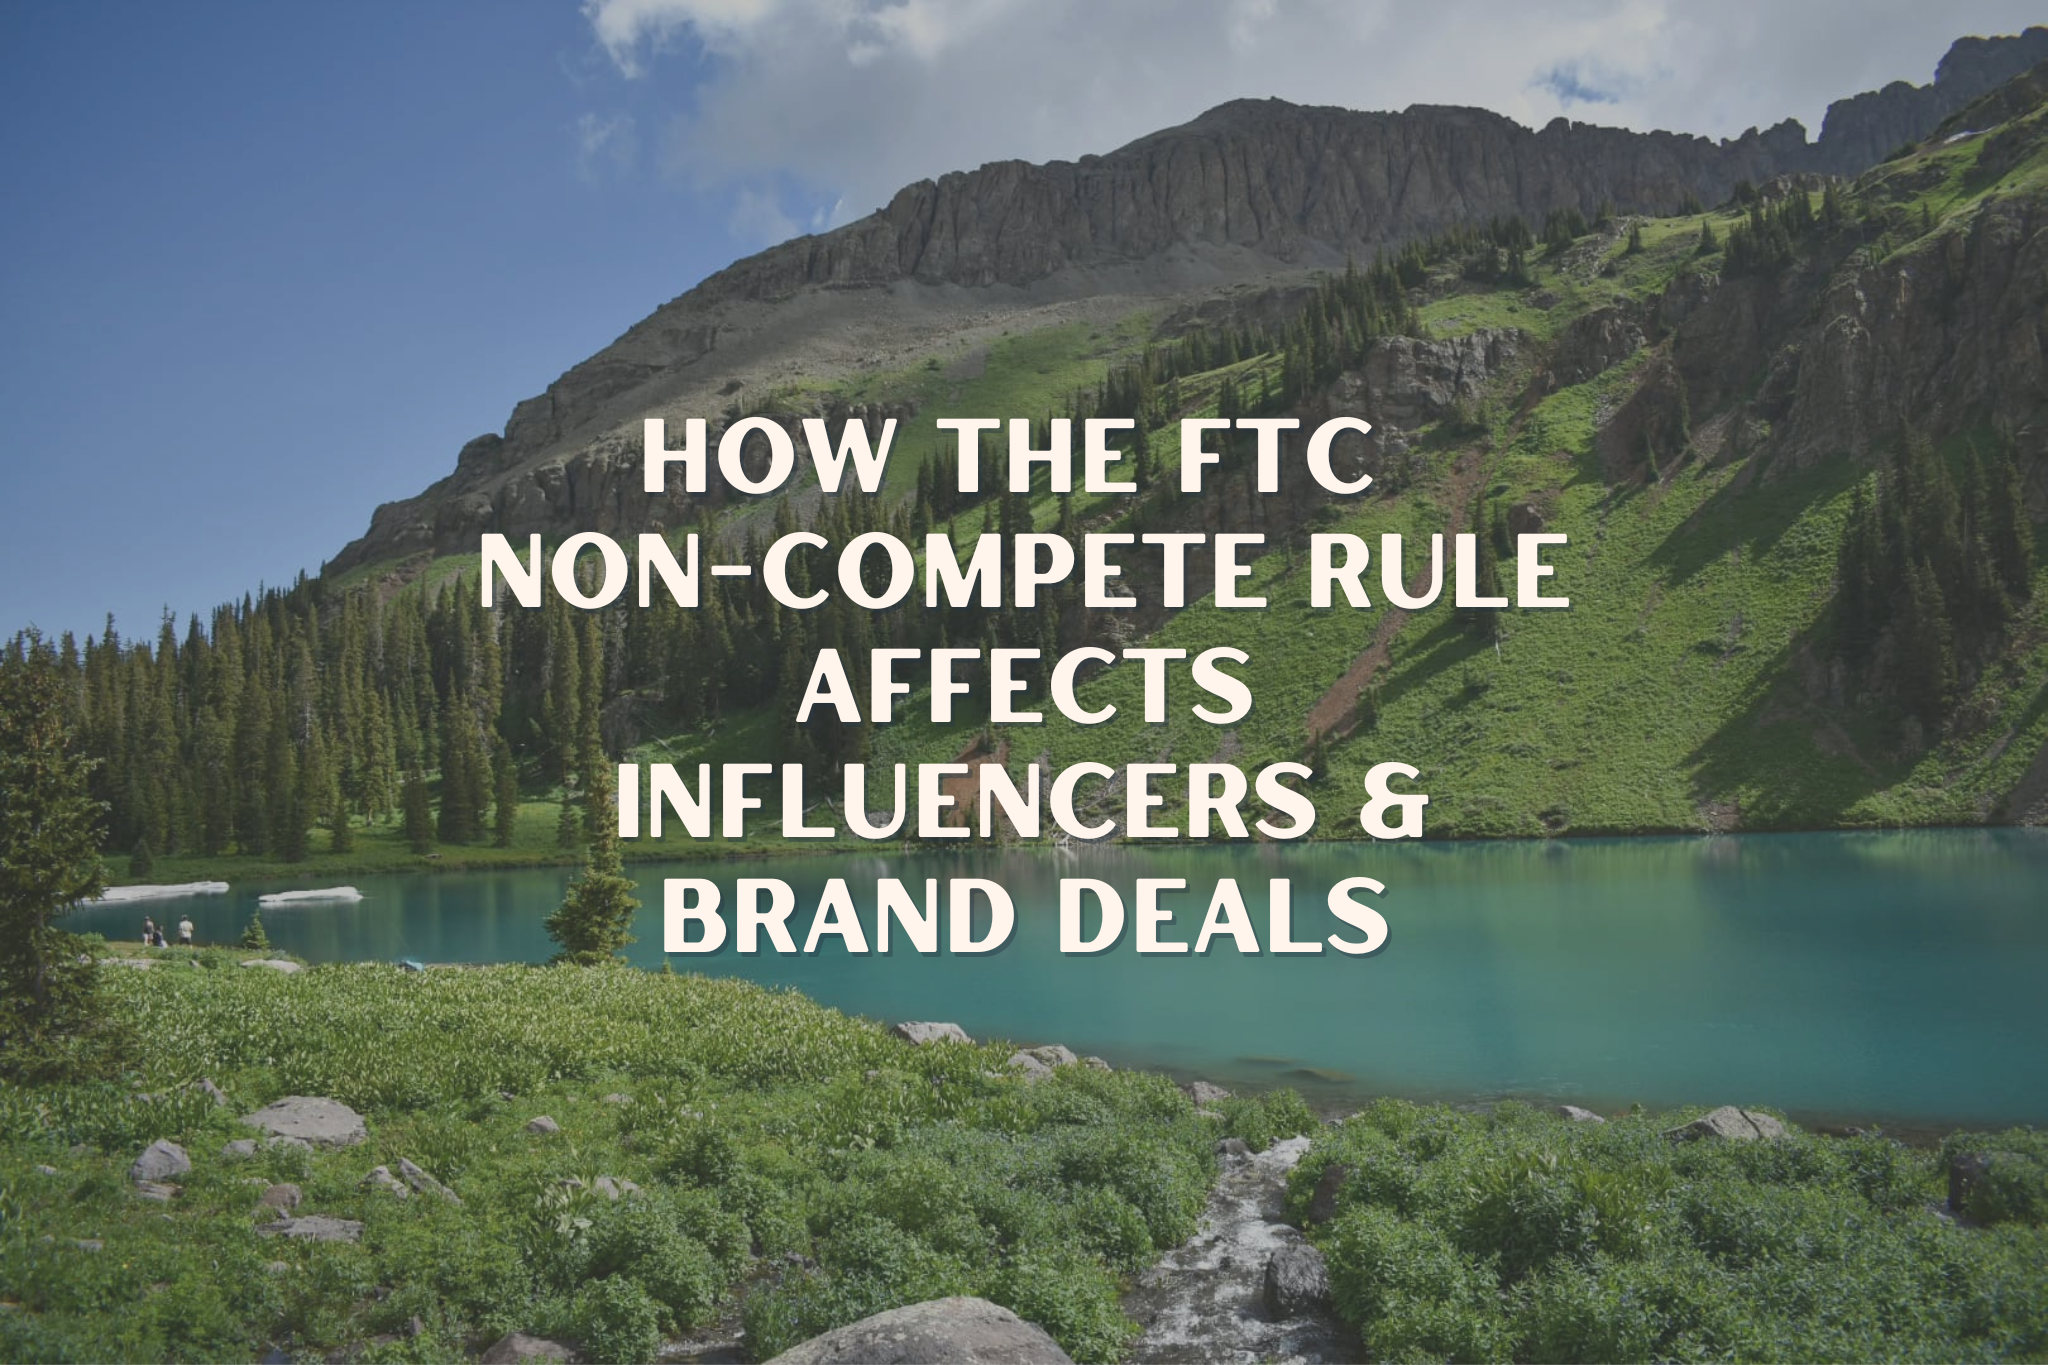 How the FTC Non-Compete Rule Affects Influencers & Brand Deals